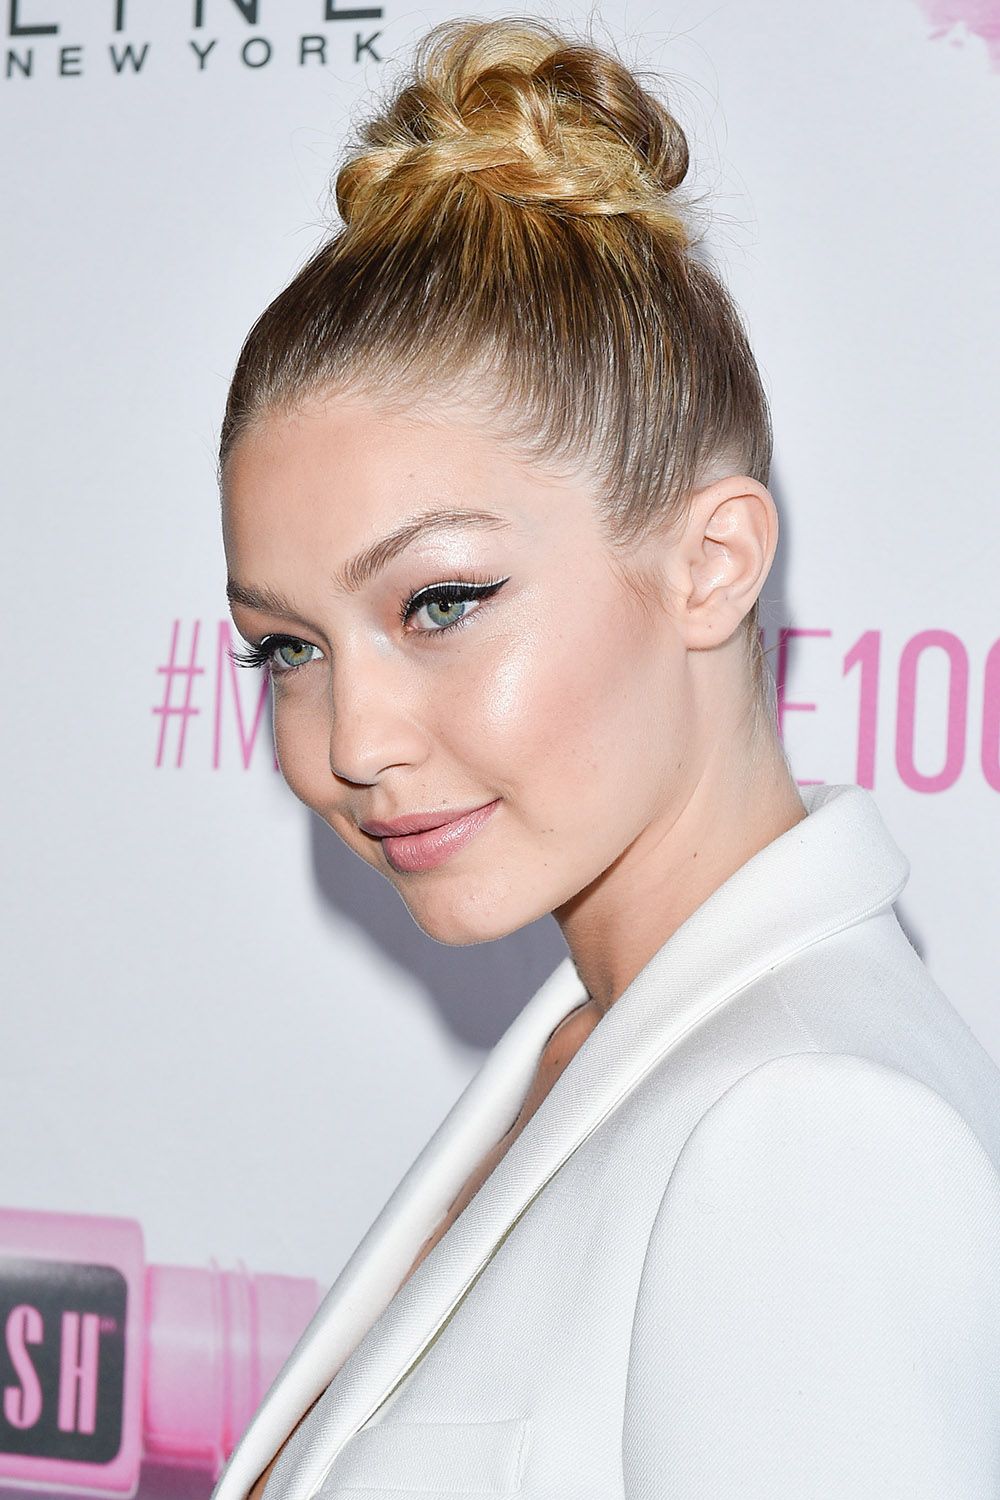 Gigi Hadid Cut Her Own Bangs As A Kid And The Photo Is Freaking Adorable   SELF